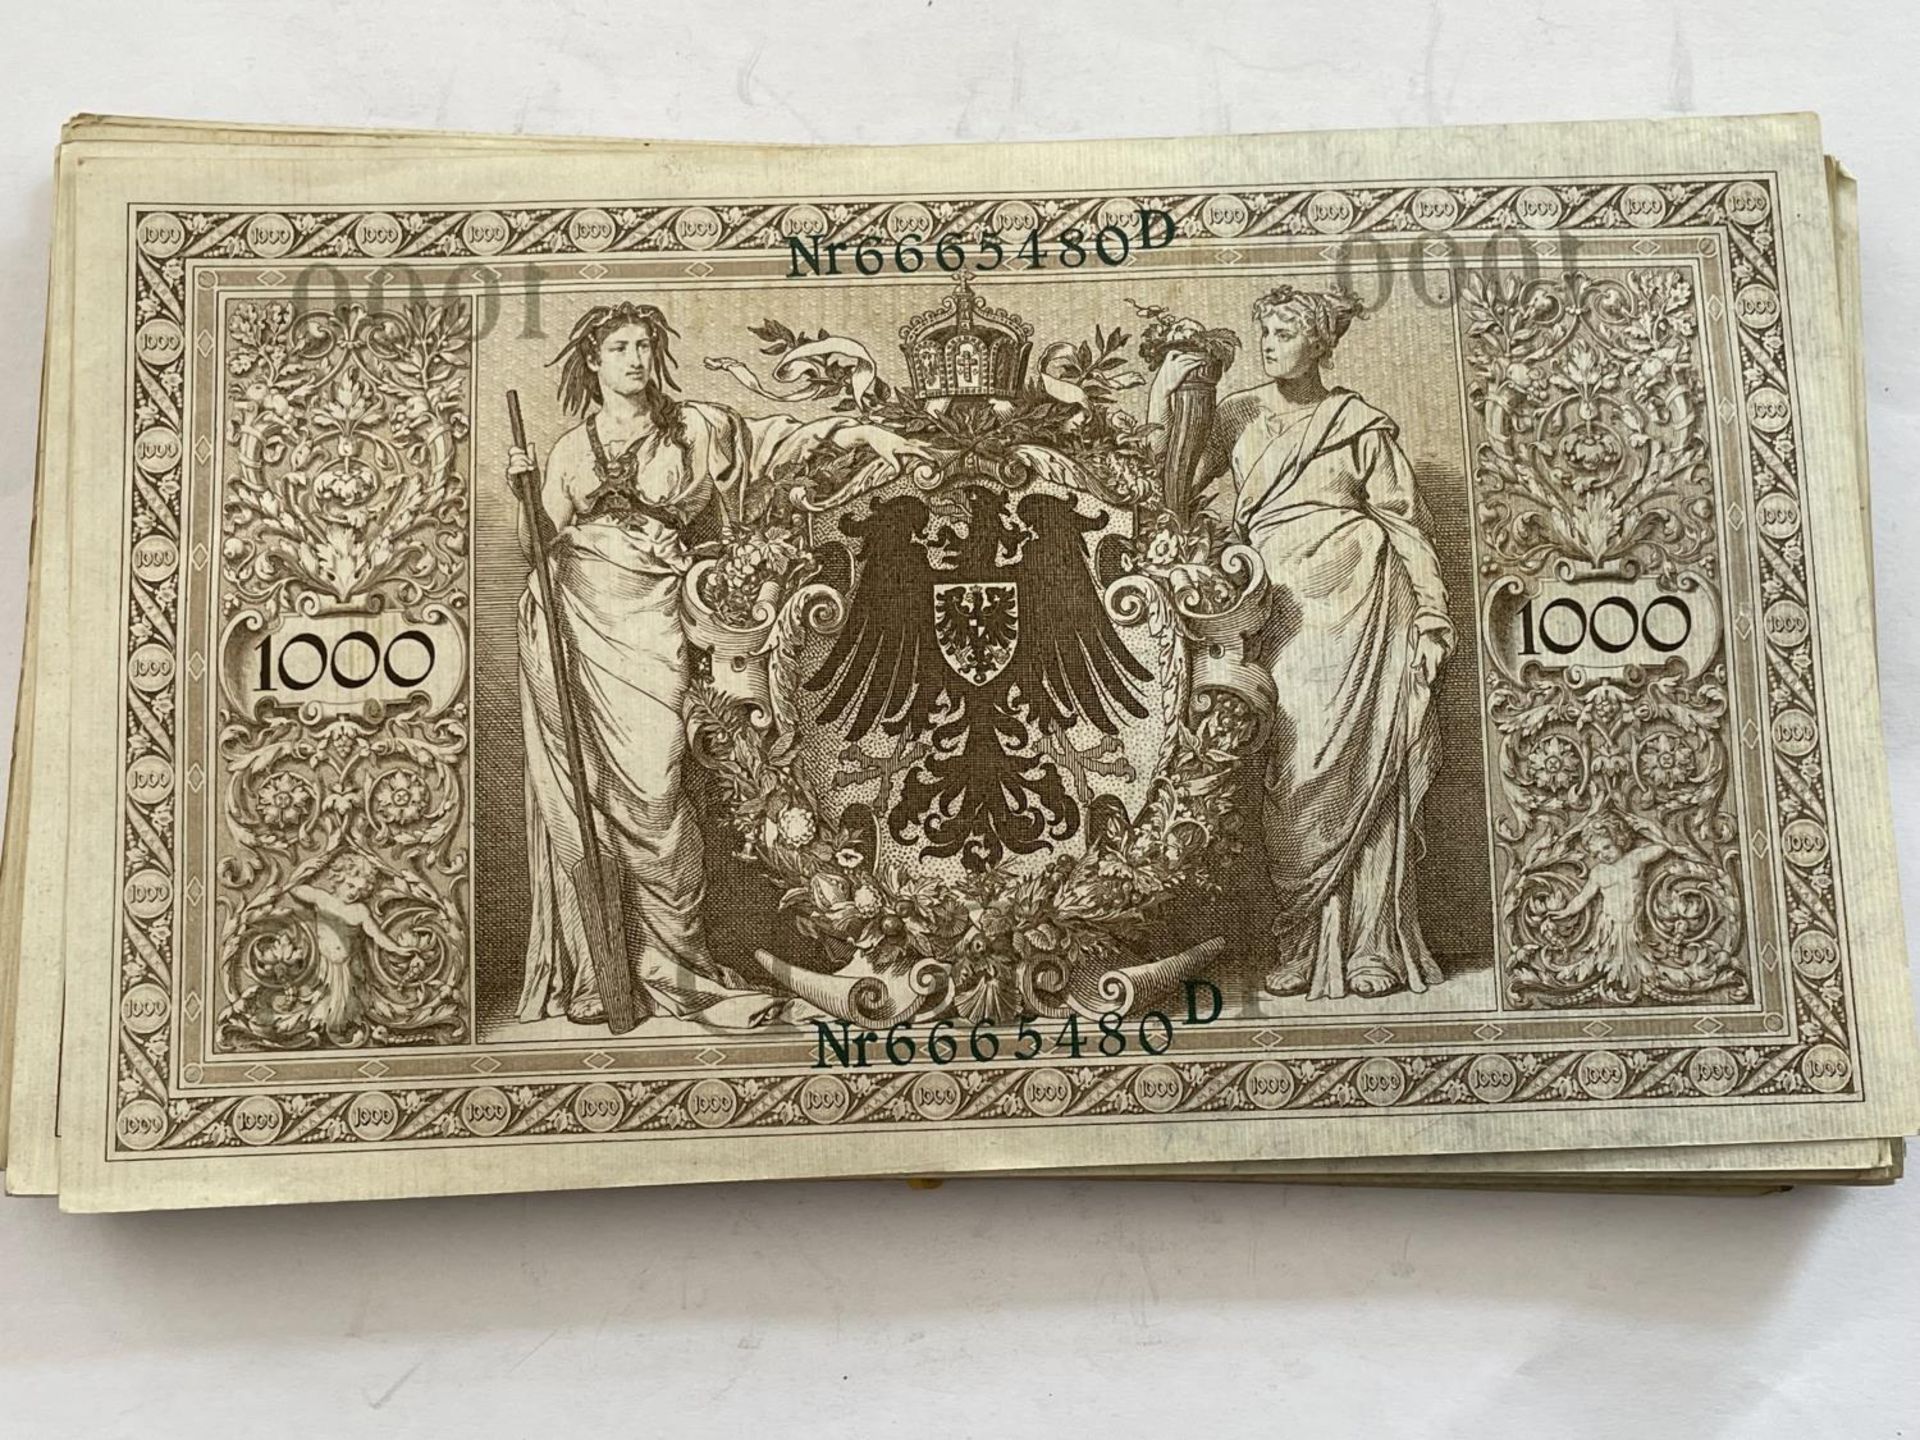 AN ENVELOPE CONTAINING A LARGE QUANTITY OF TAUSEND MARK GERMAN BANK NOTES, DATED BERLIN 21 APRIL - Image 2 of 3